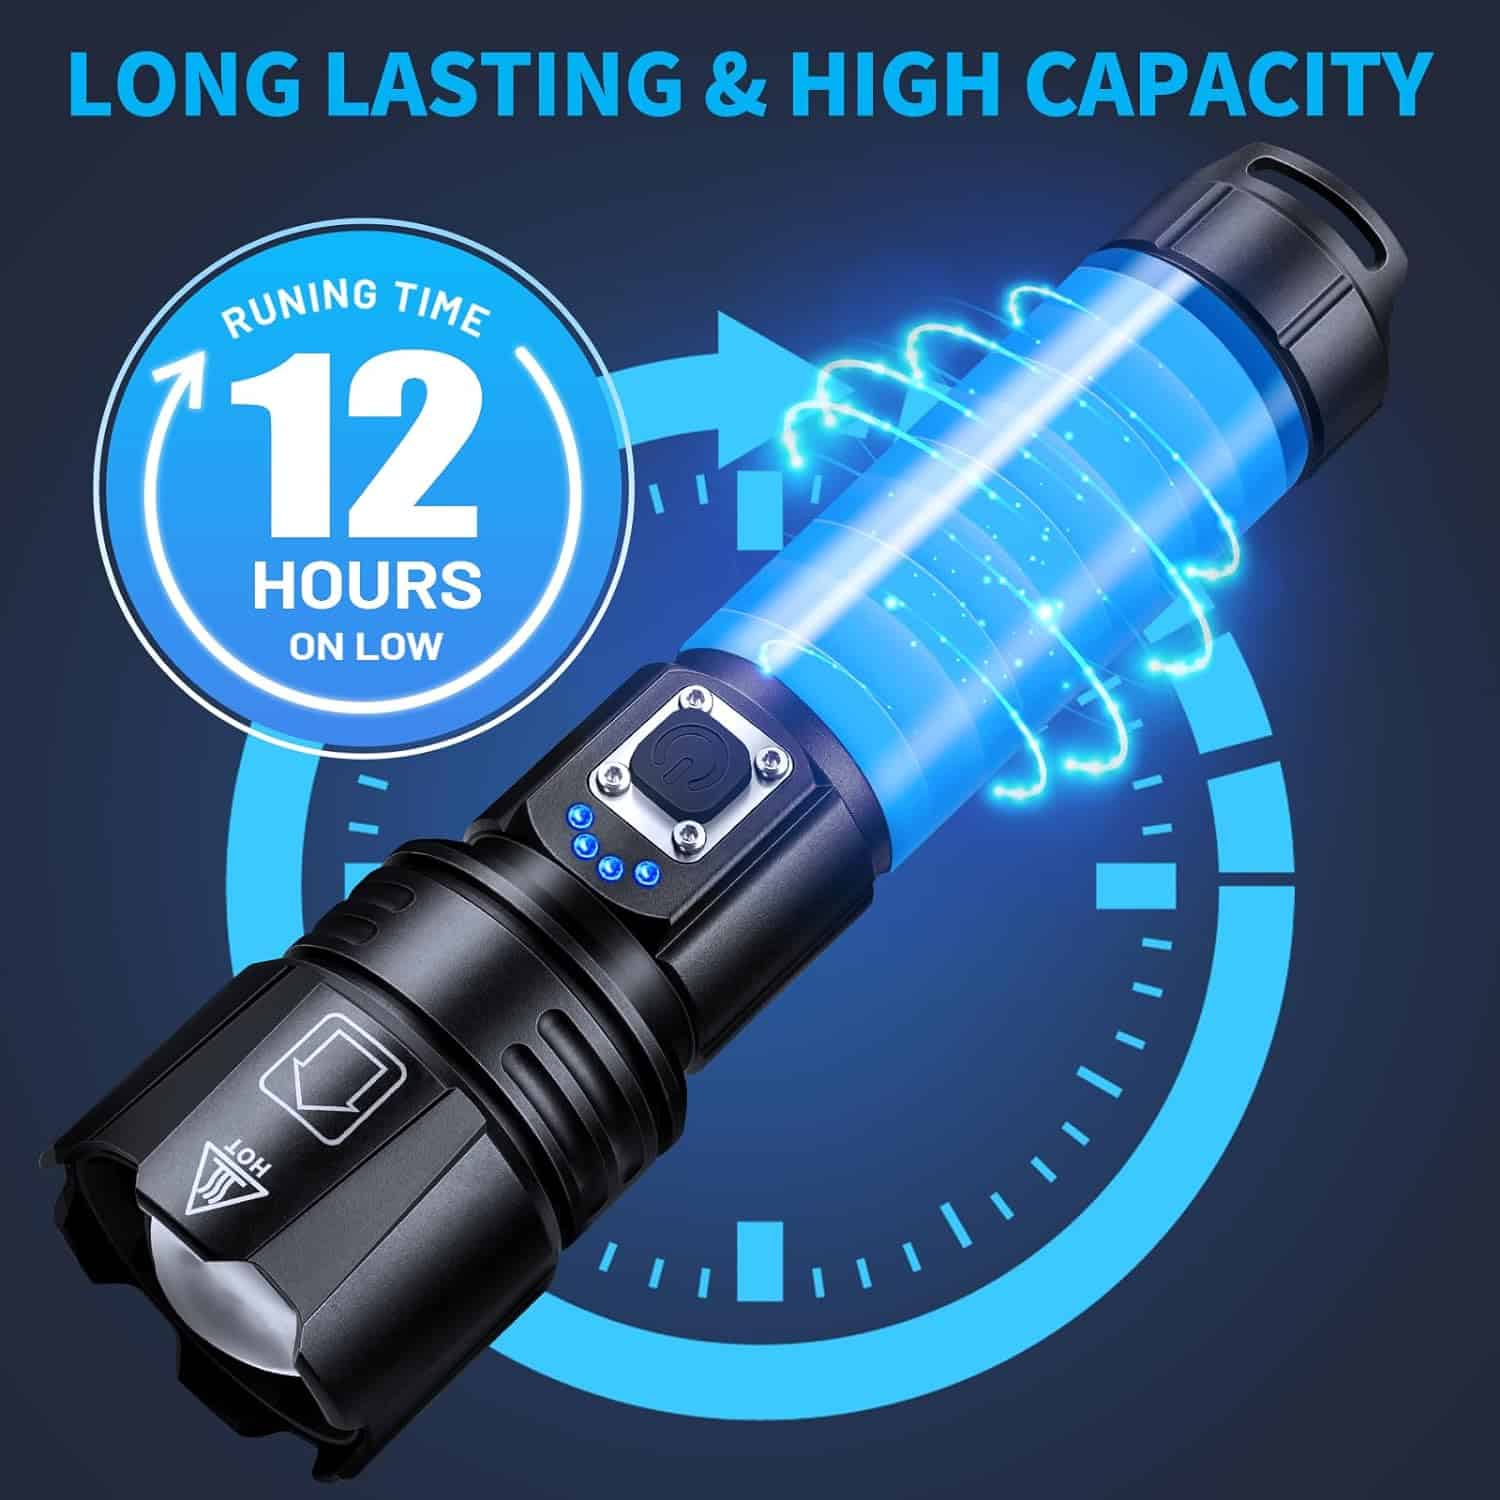 Rechargeable Flashlights High Lumens, 900,000 Lumen Brightest Led Flashlight with 5 Modes  12H Long Runtime, Powerful Waterproof Handheld Flash Light, Super Bright Flashlight for Camping, Hiking